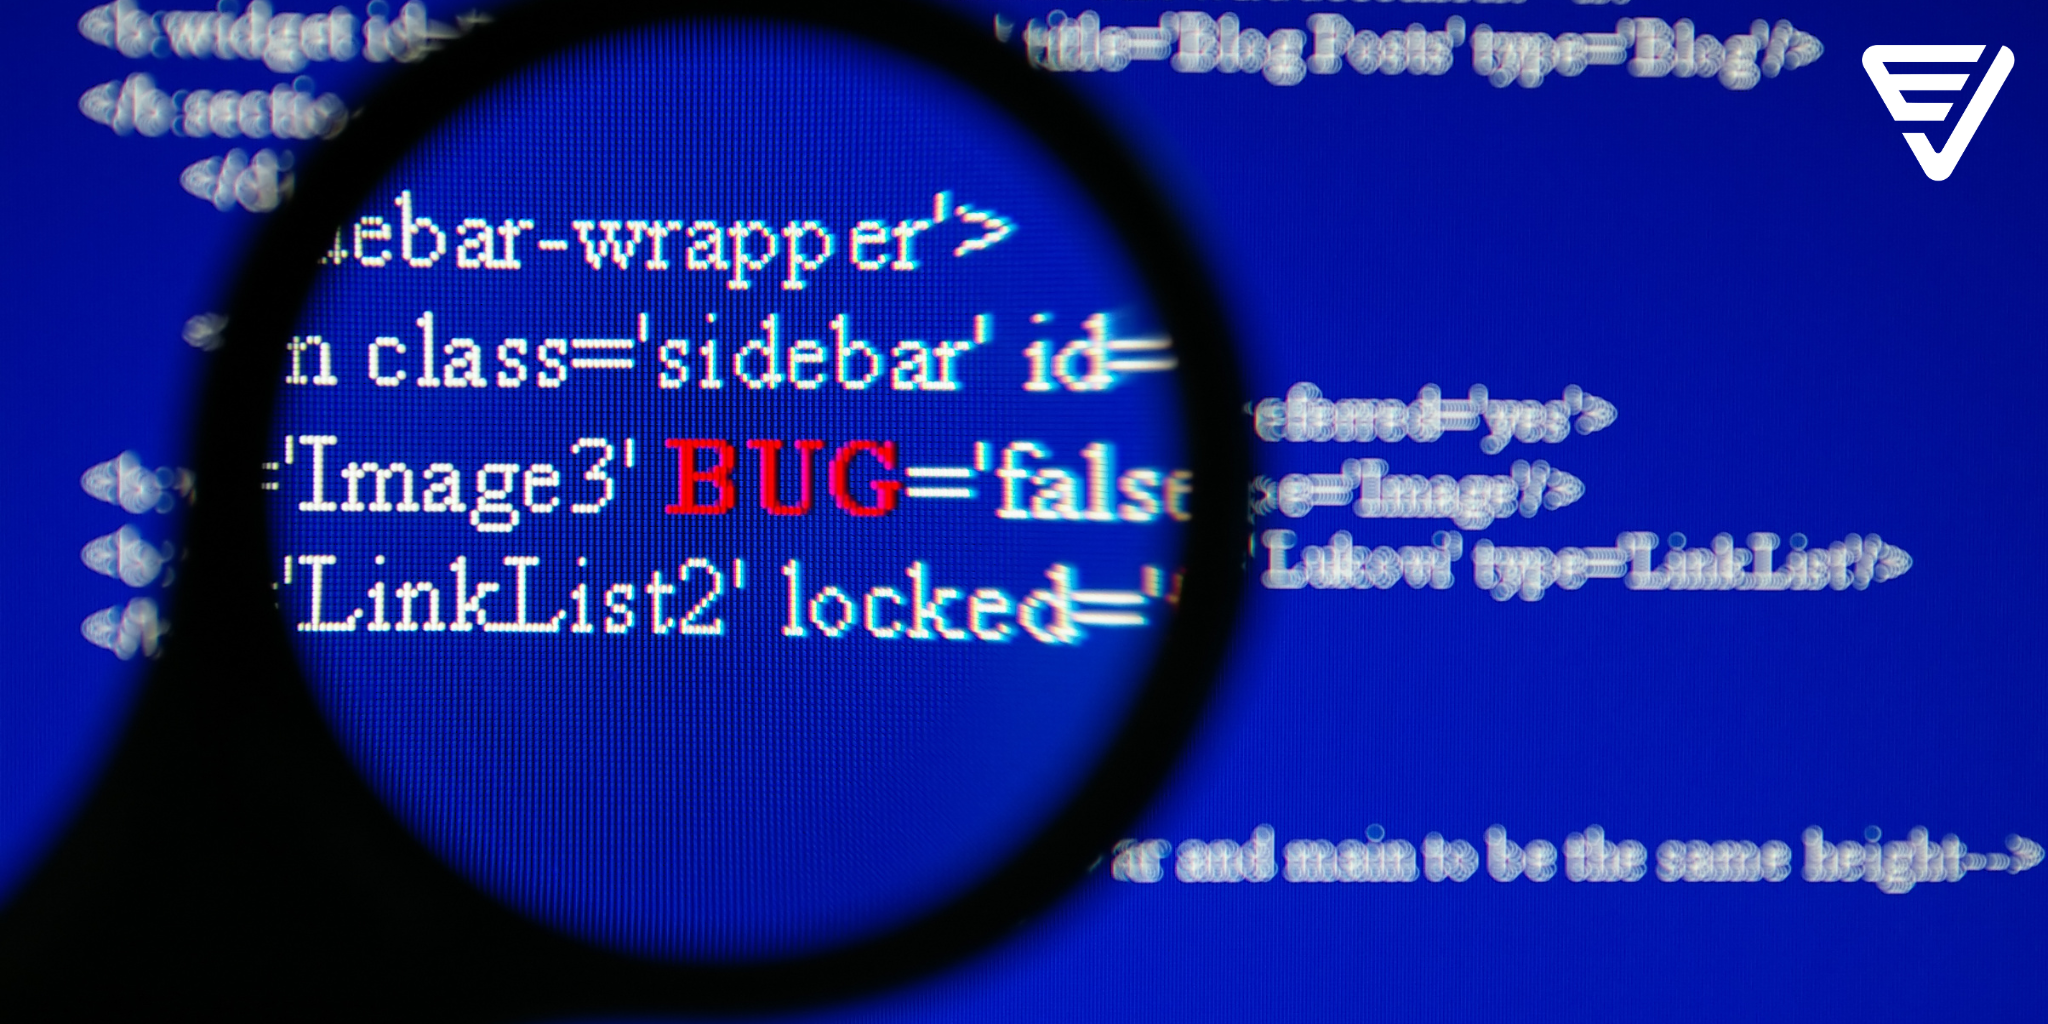 bug-tracking-process-for-apps